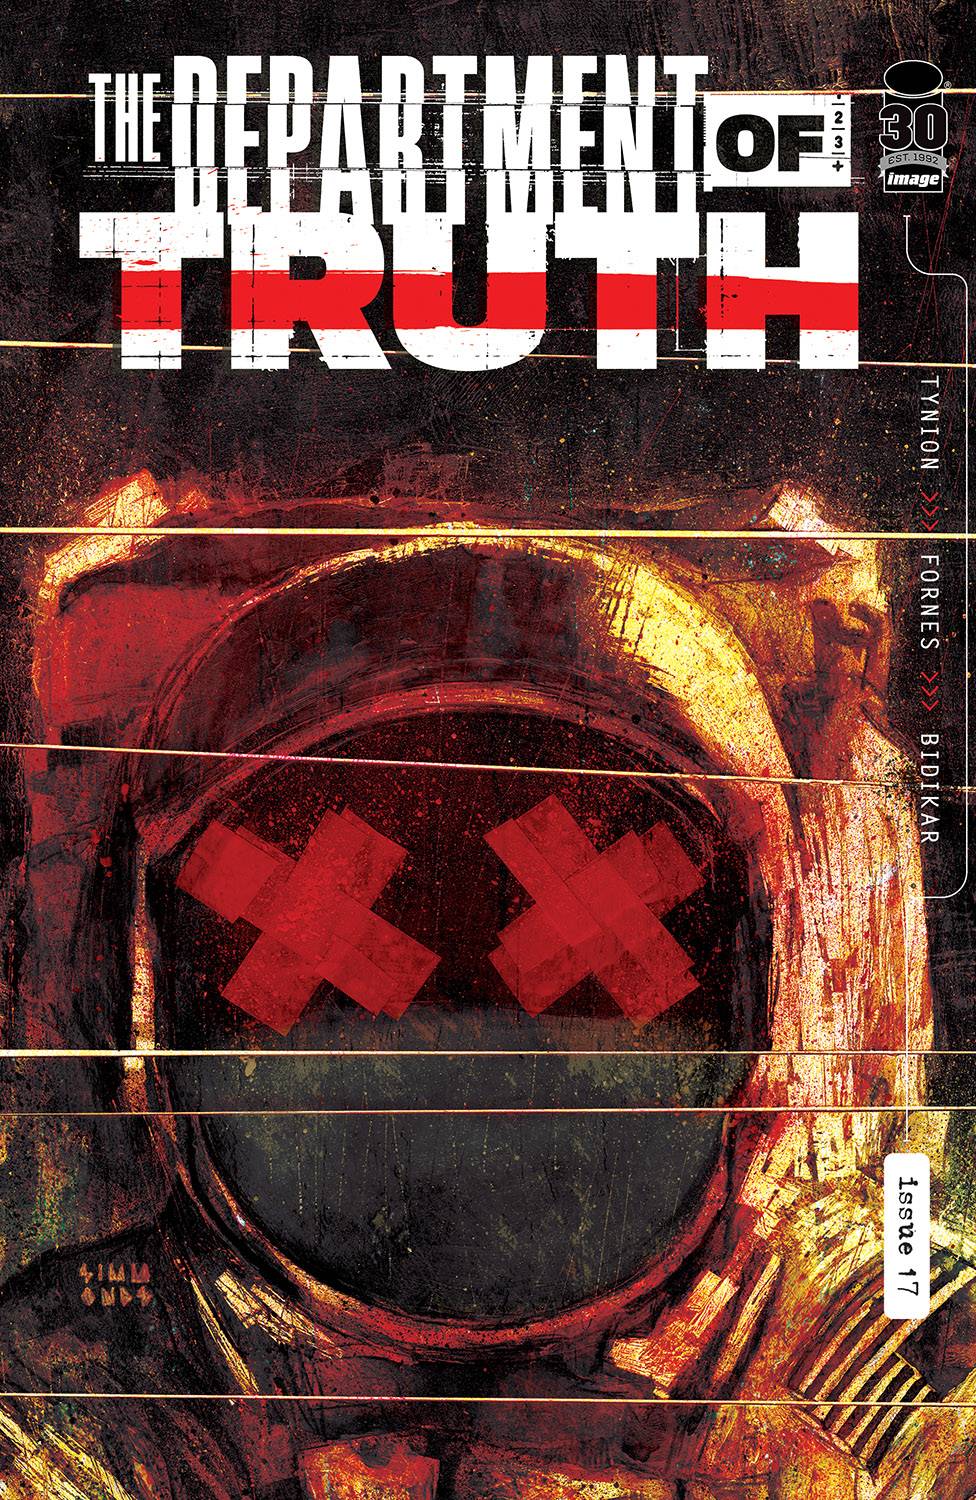 DEPARTMENT OF TRUTH #17 COVER A SIMMONDS - Third Eye